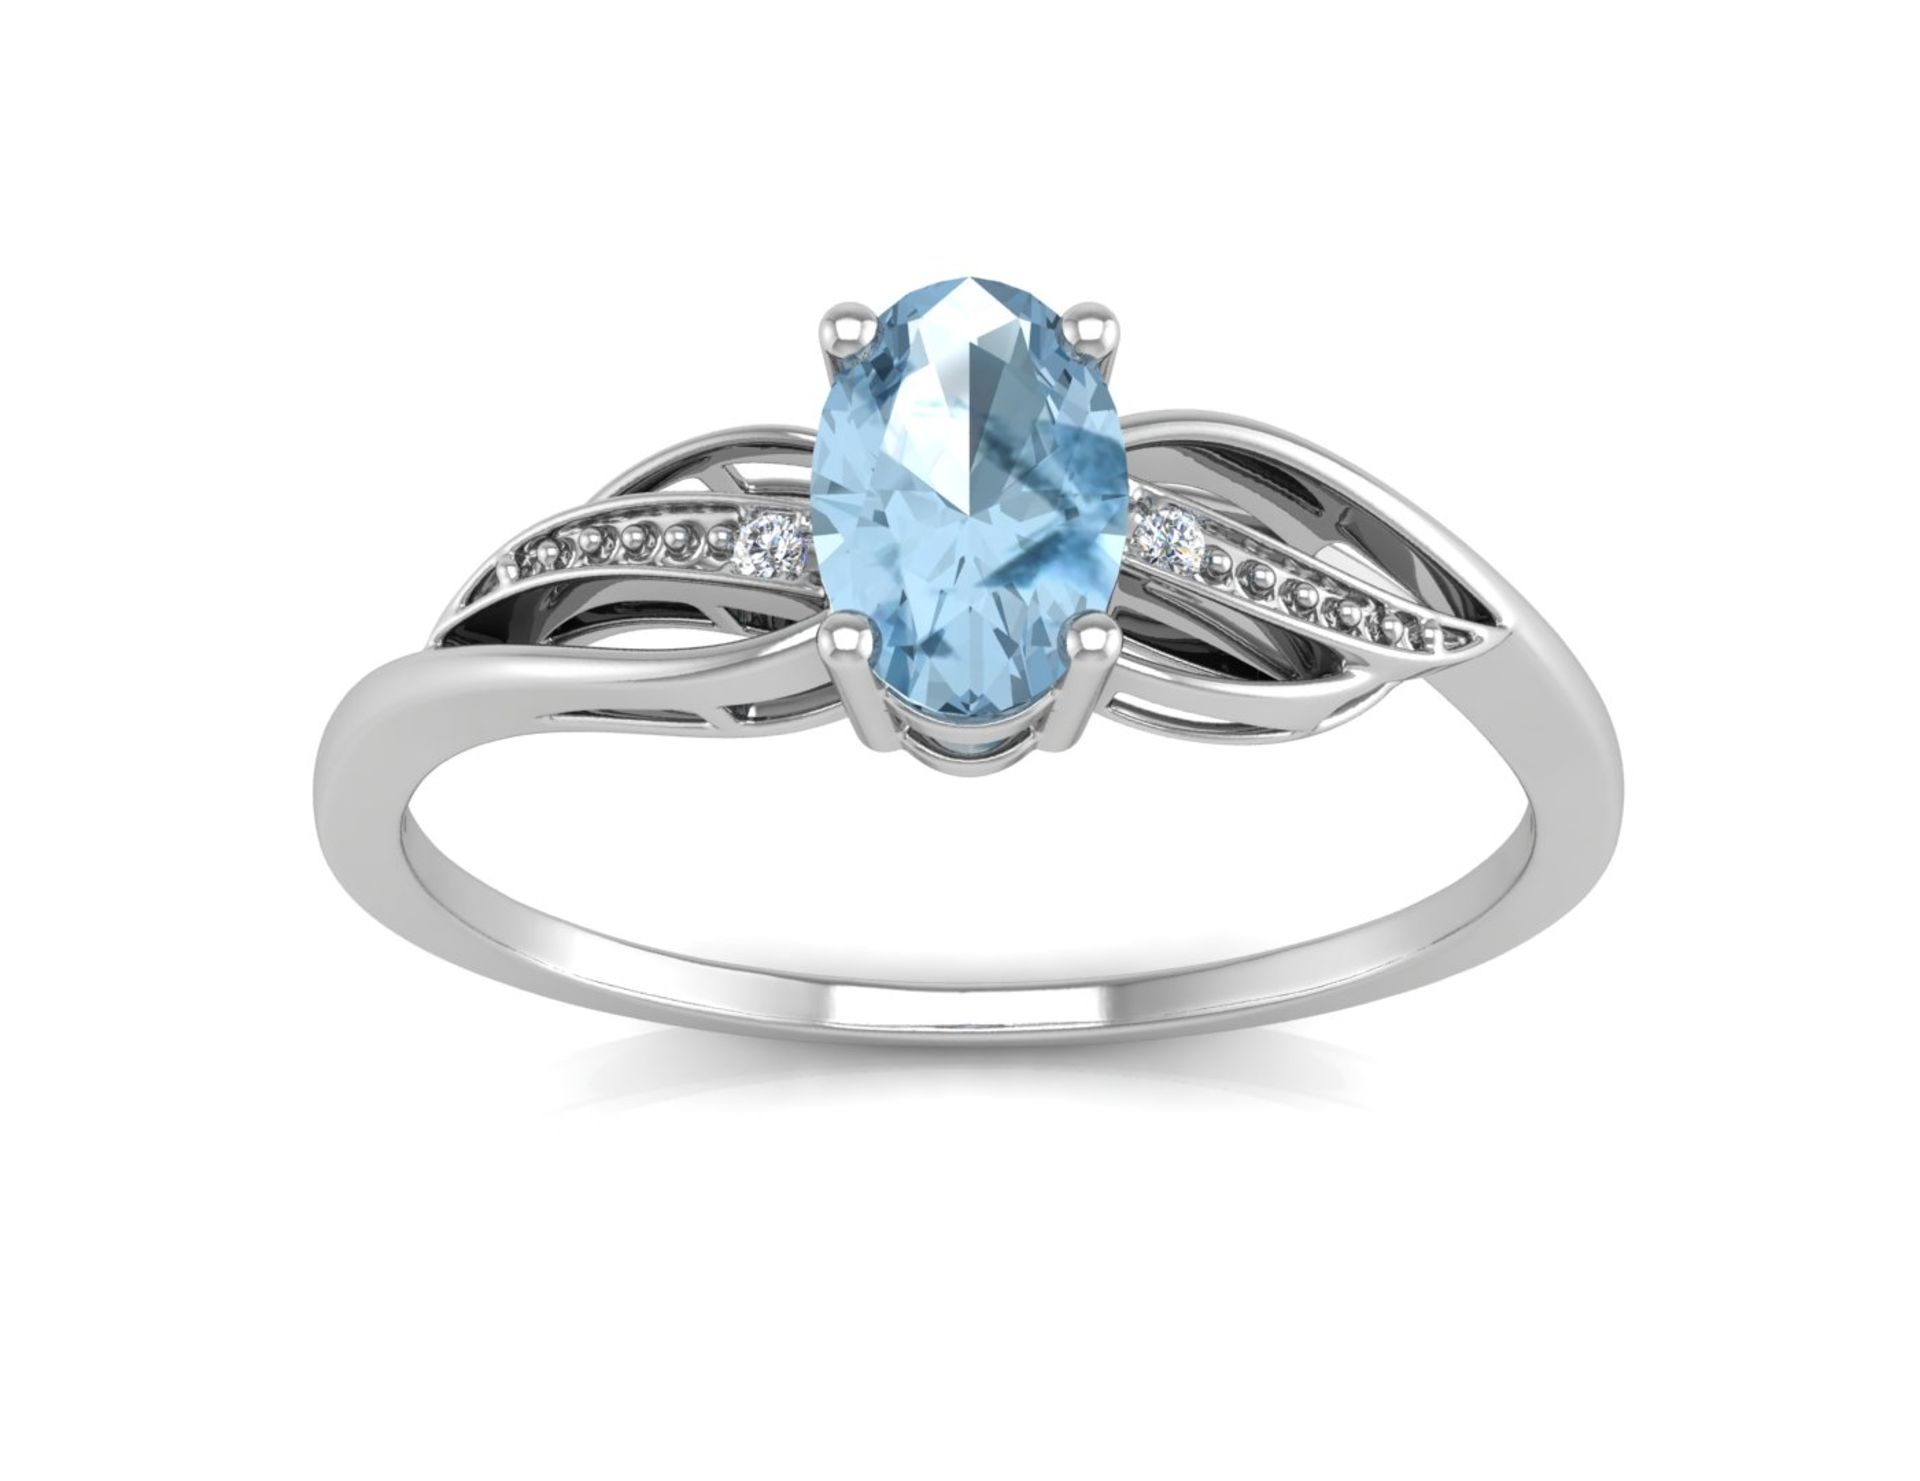 9ct White Gold Diamond And Oval Shape Blue Topaz Twist Ring 0.01 Carats - Valued by GIE £950.00 - - Image 3 of 5